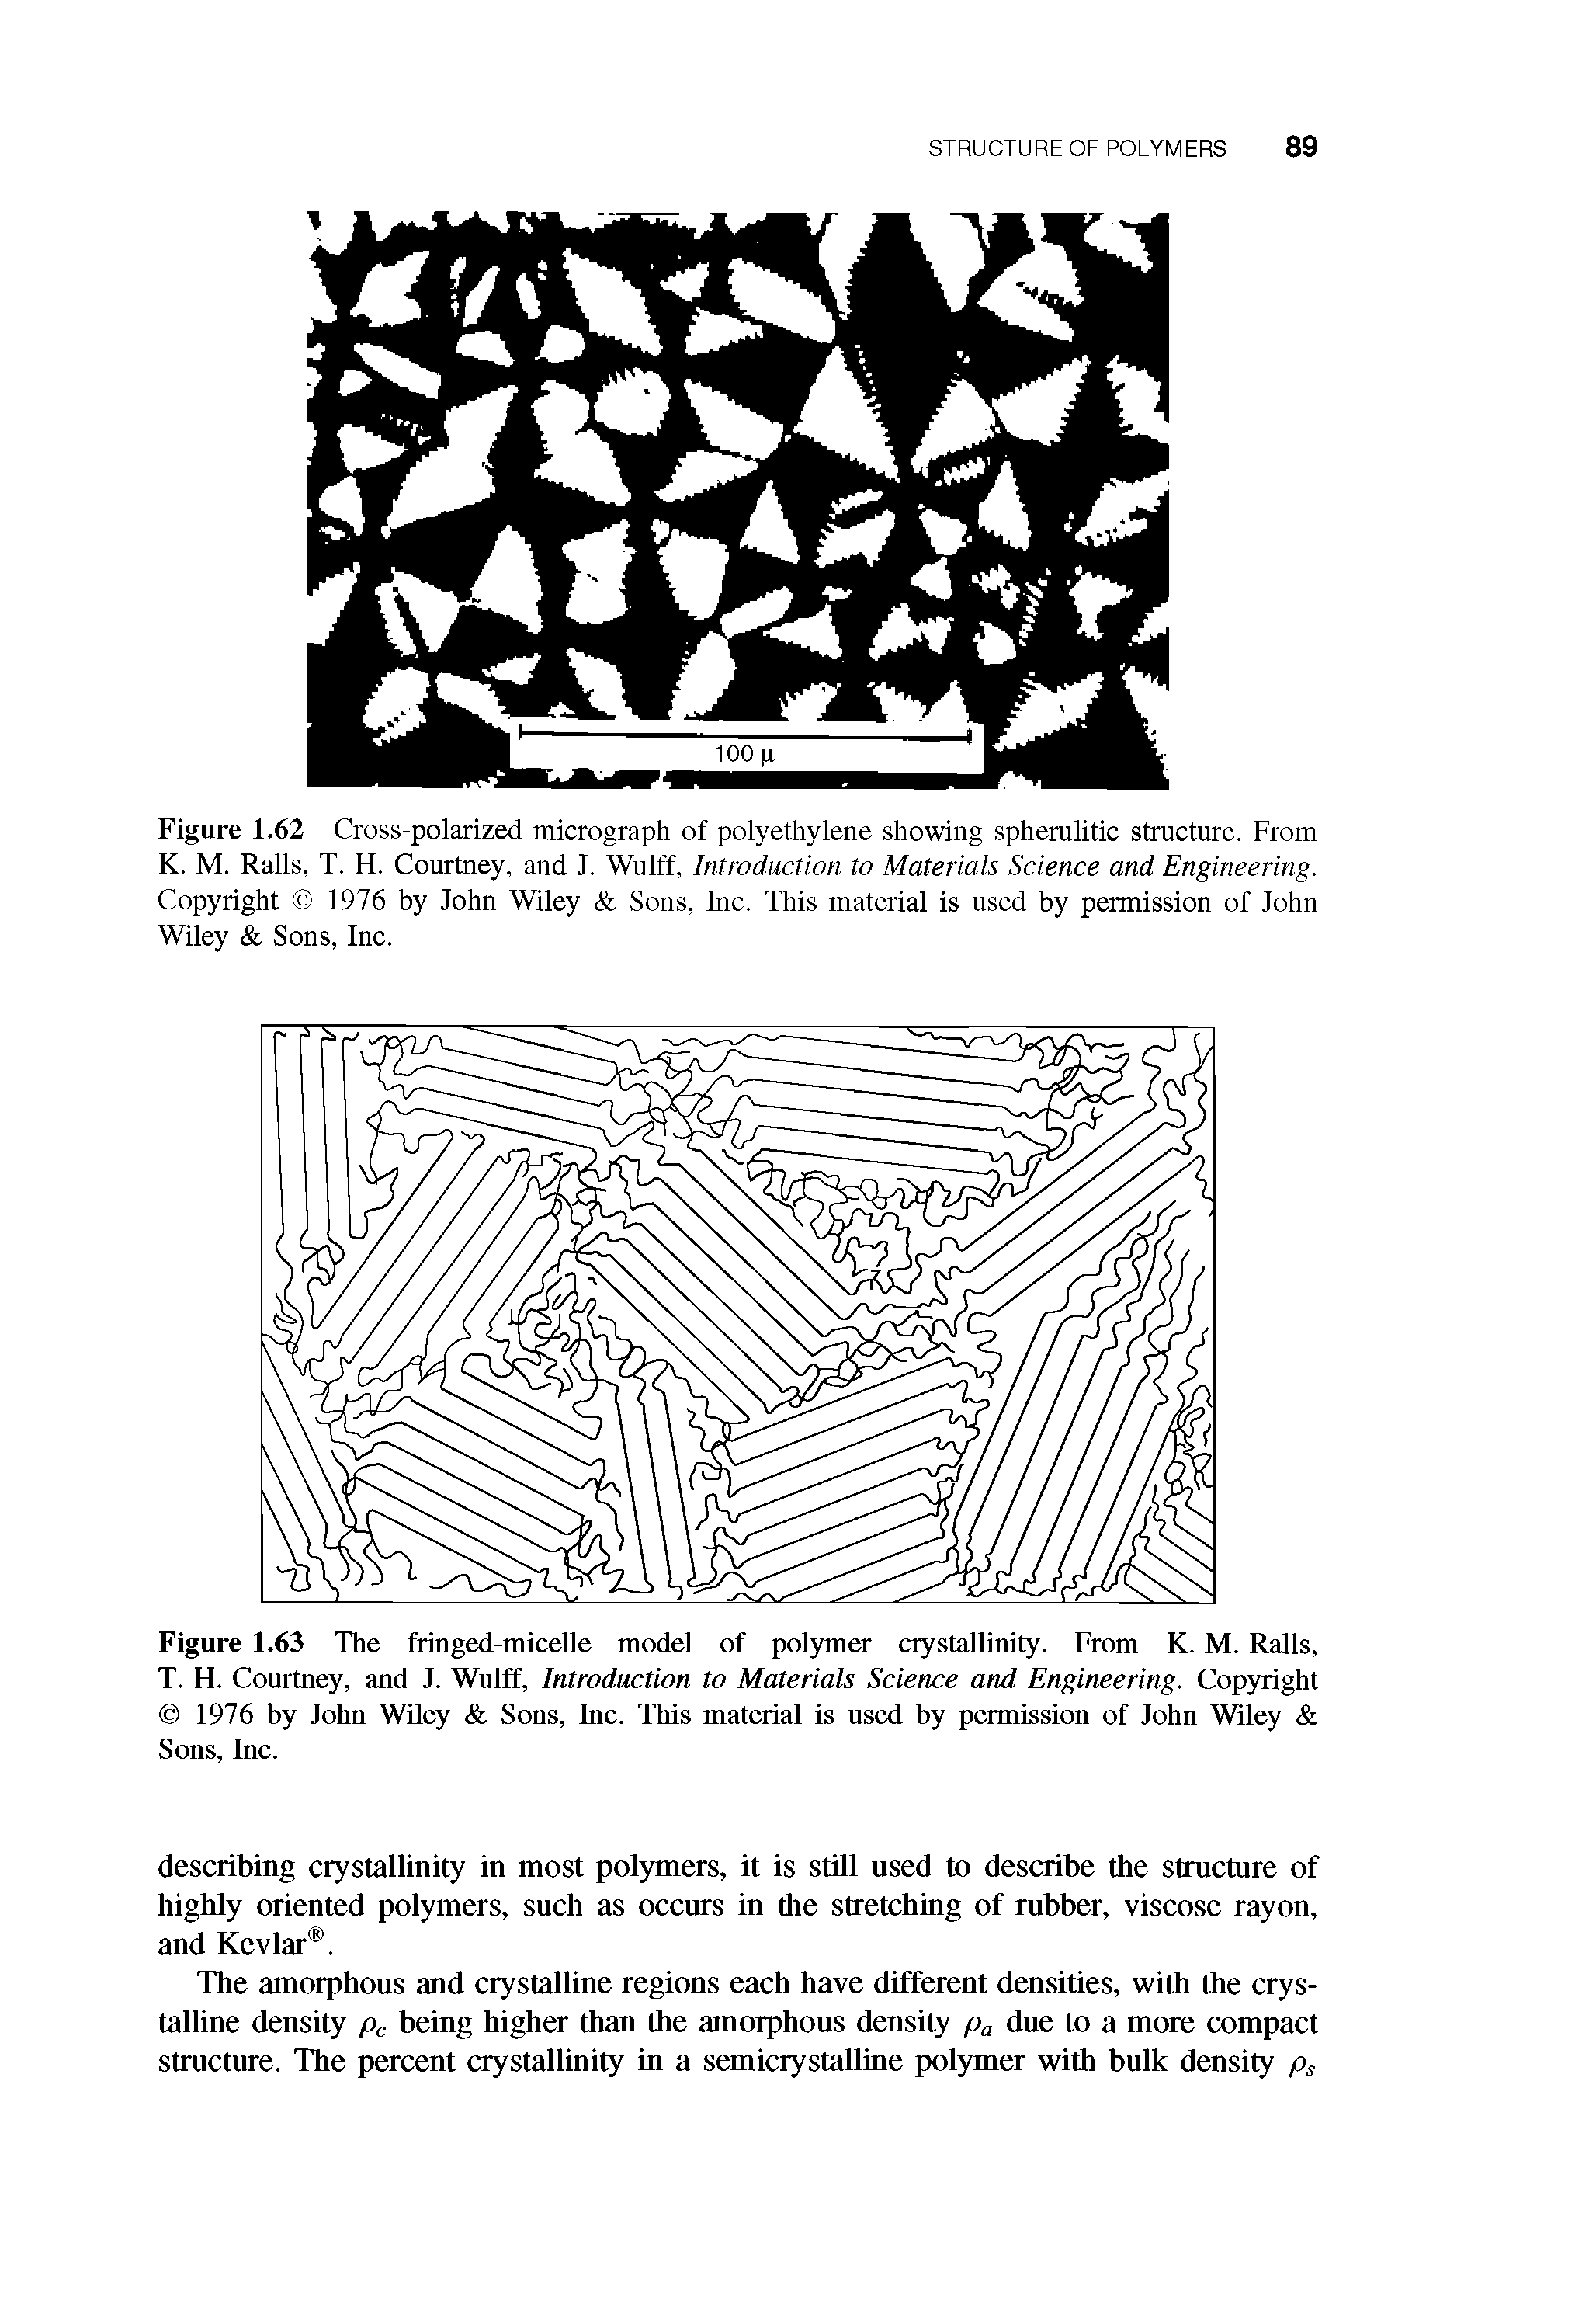 Figure 1.63 The fringed-miceUe model of polymer crystallinity. From K. M. Ralls, T. H. Courtney, and J. Wnlff, Introduction to Materials Science and Engineering. Copyright 1976 by John Wiley Sons, Inc. This material is nsed by permission of John Wiley Sons, Inc.